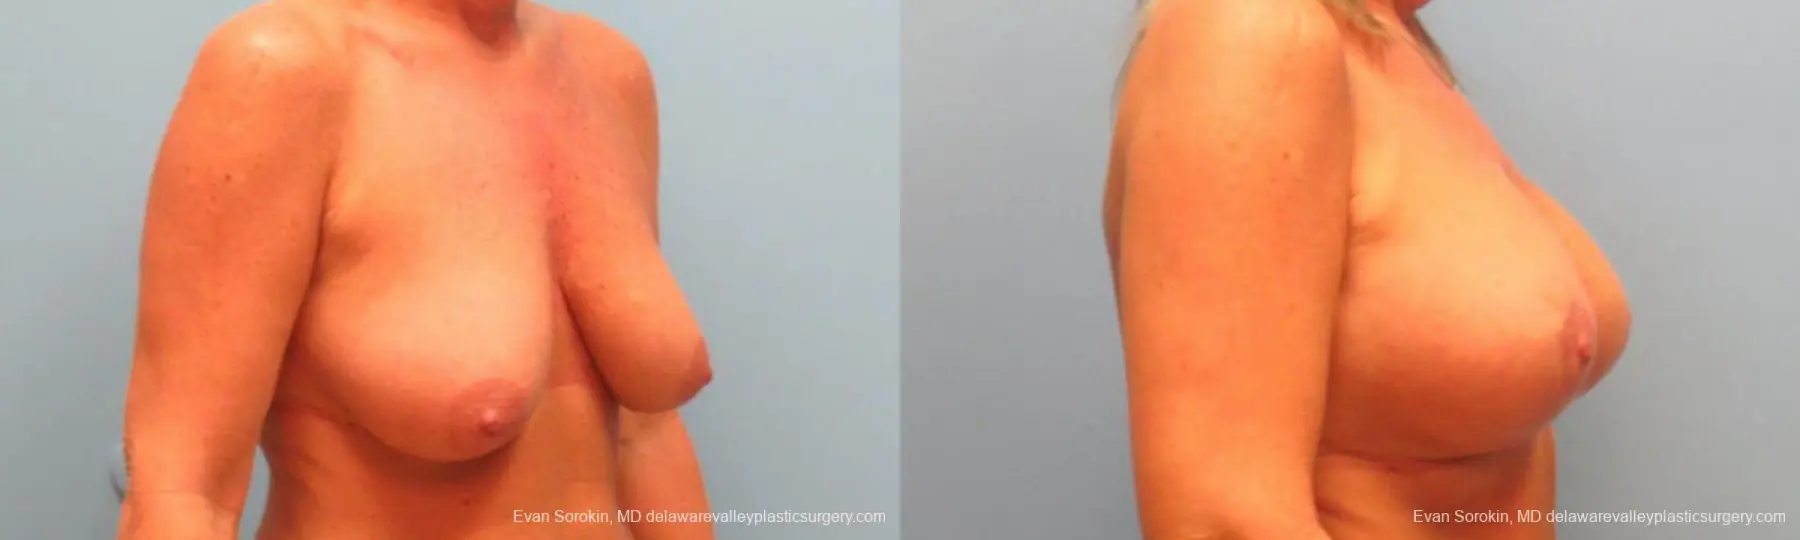 Philadelphia Breast Lift and Augmentation 9398 - Before and After 3